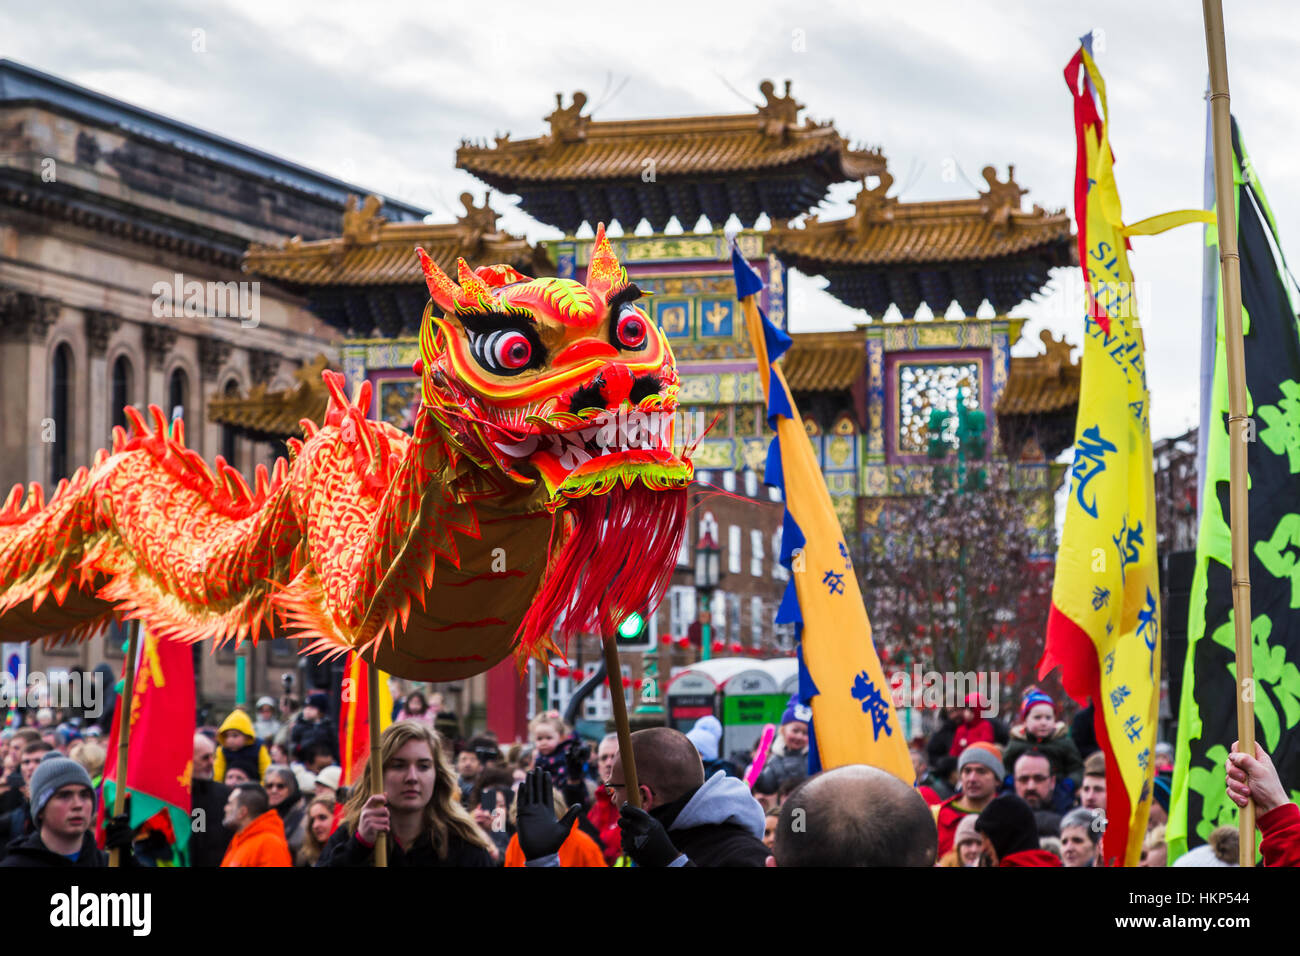 Close-up of orange and red coloured dragon in Liverpool's Chinatown chasing a pearl during Chinese New Year celebrations Stock Photo